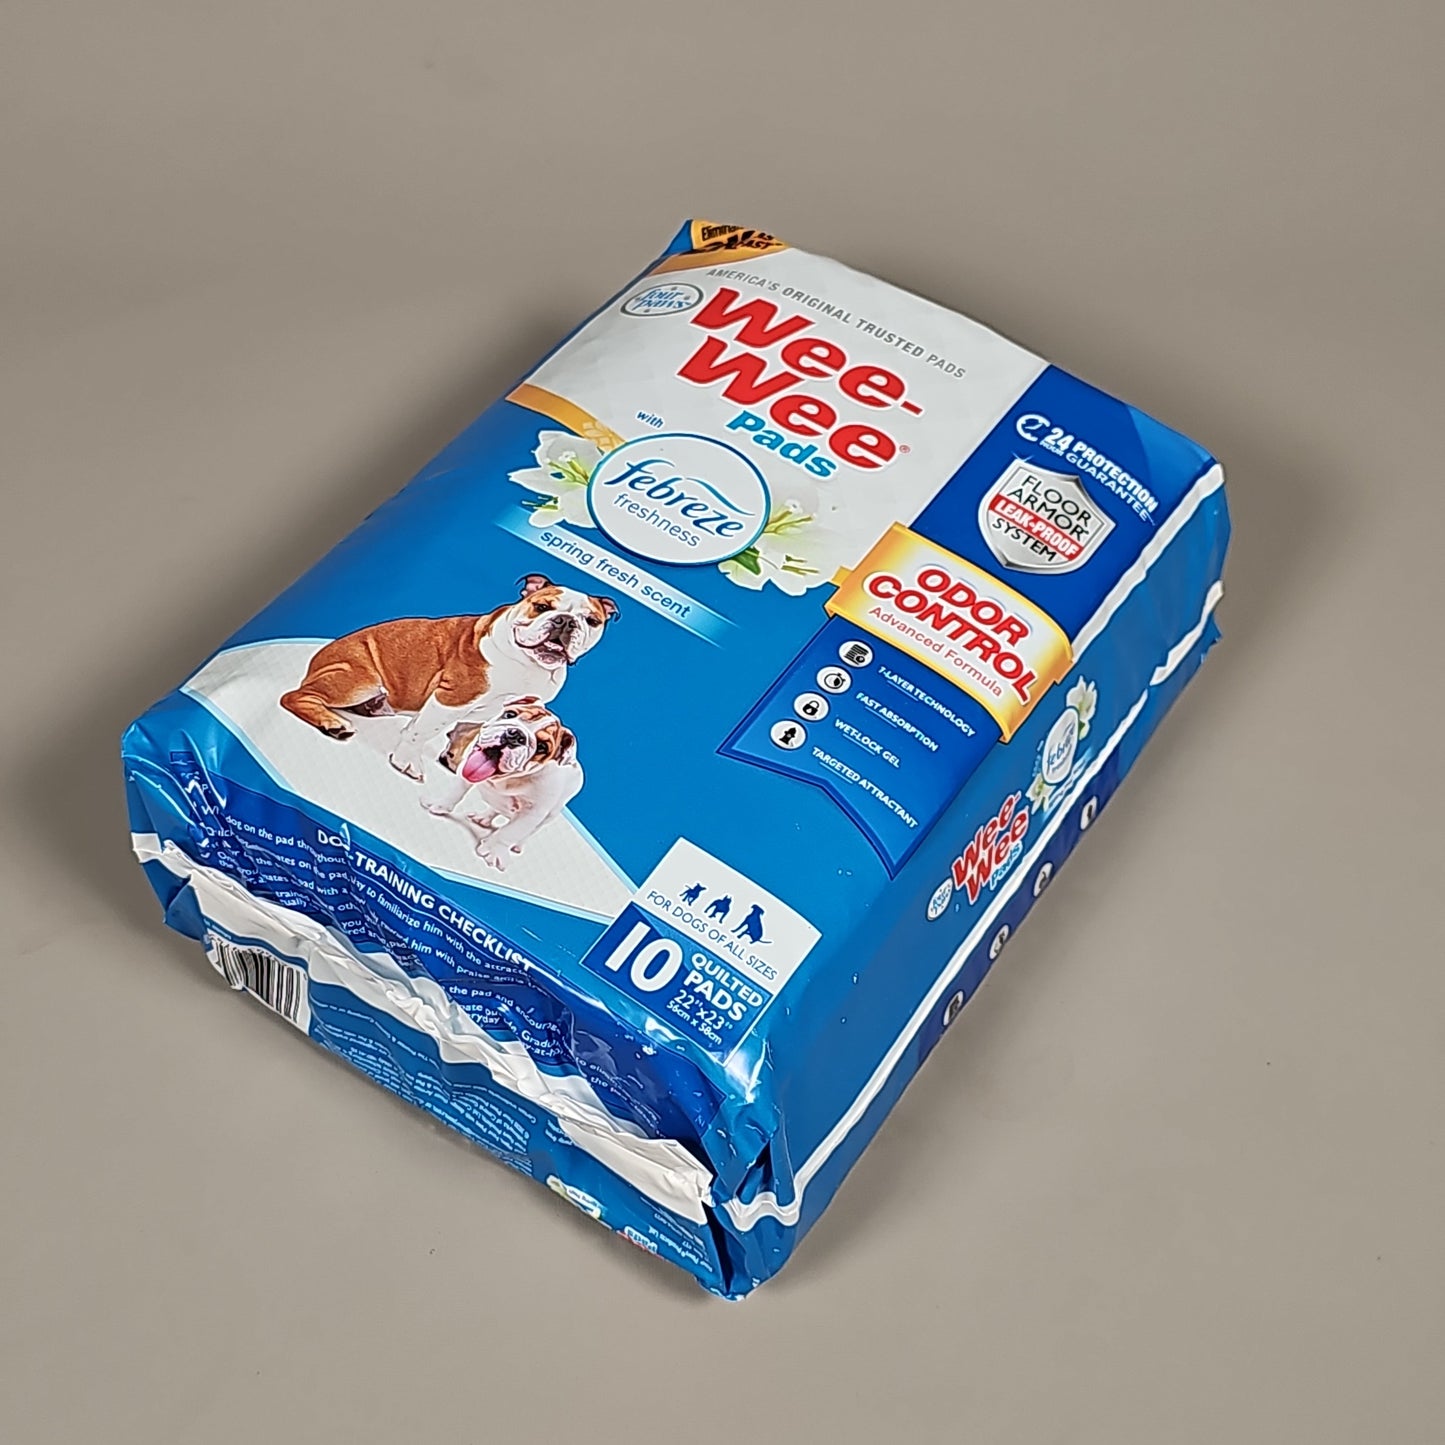 z@ FOUR PAWS Wee-Wee Pee Pads for Dogs Odor Control With Febreeze 10 Pads 100534949 (New)